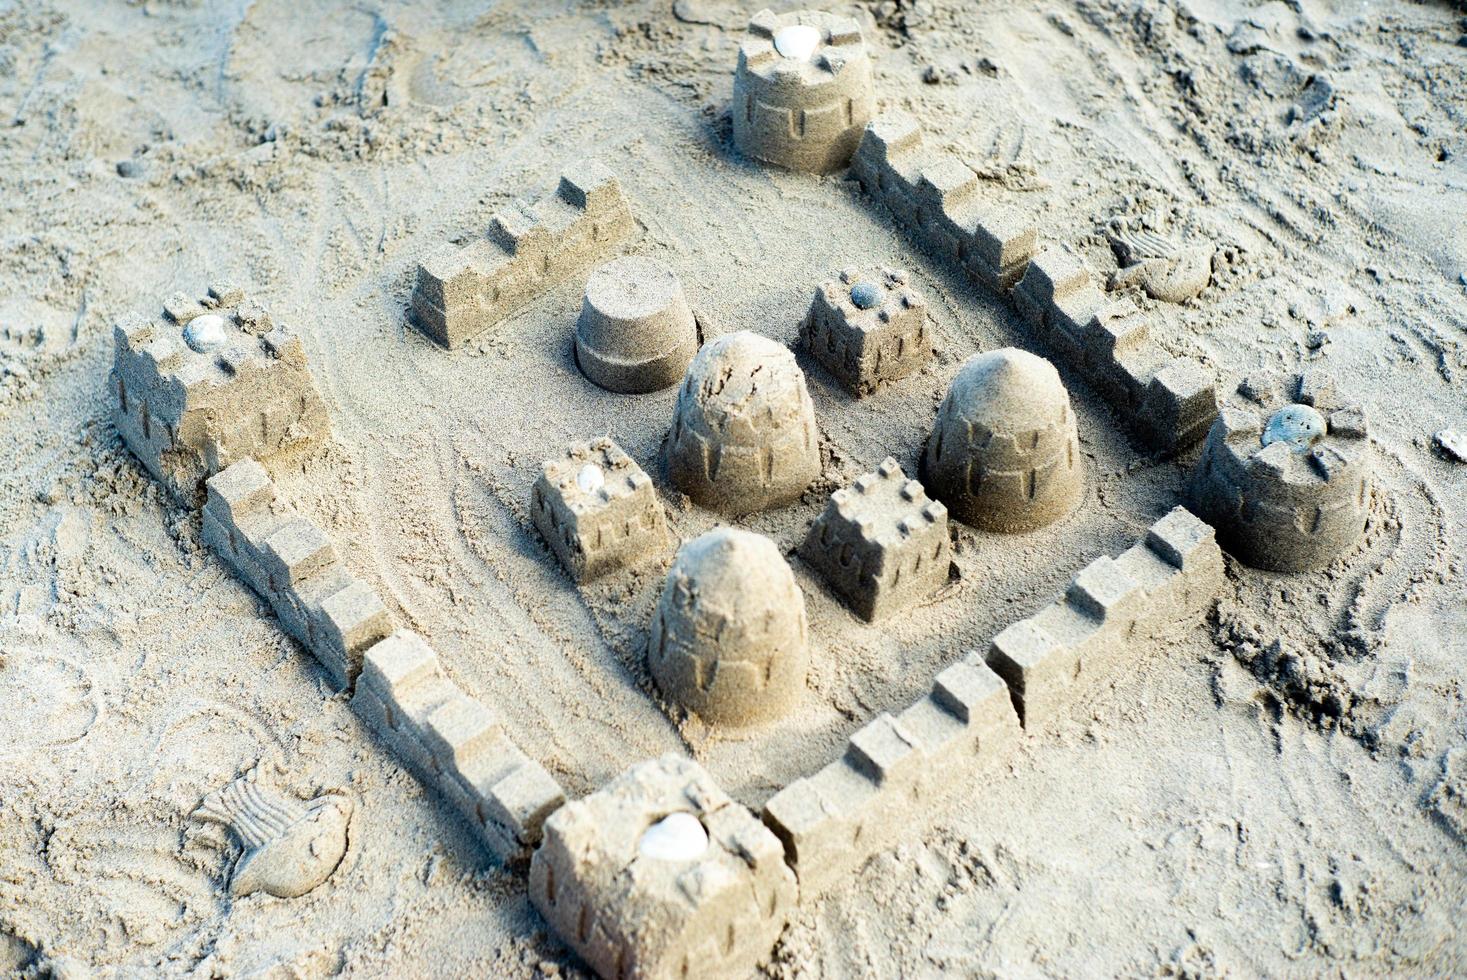 The sandcastle built by using the mold on the beach photo